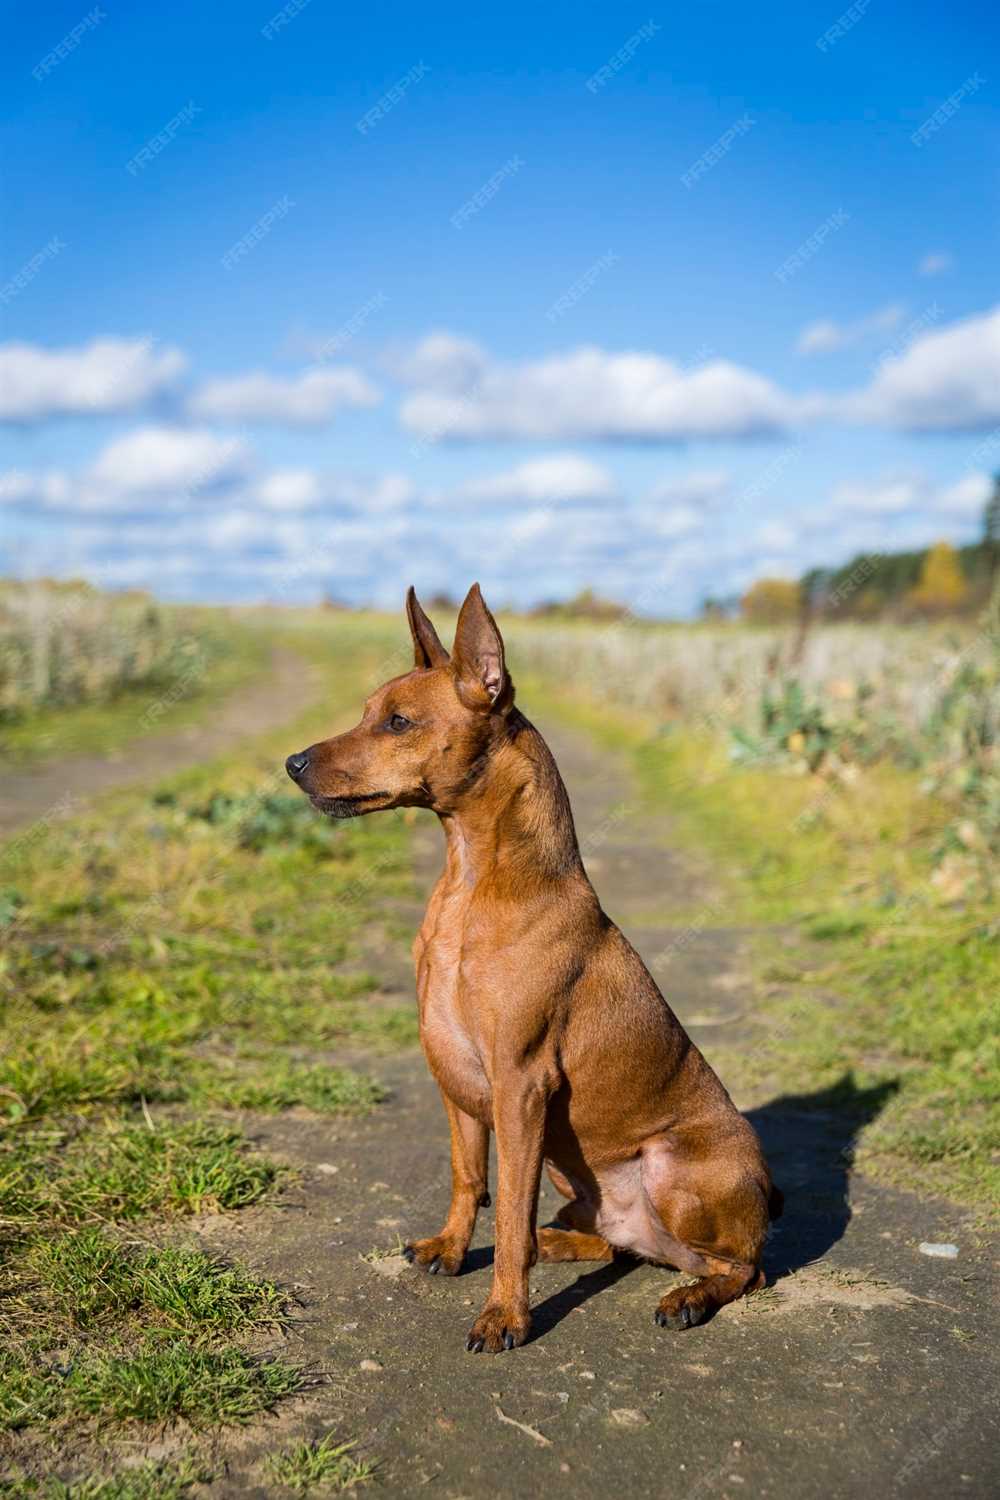 Delve into the allure of the Miniature Pinscher dog breed through captivating visuals